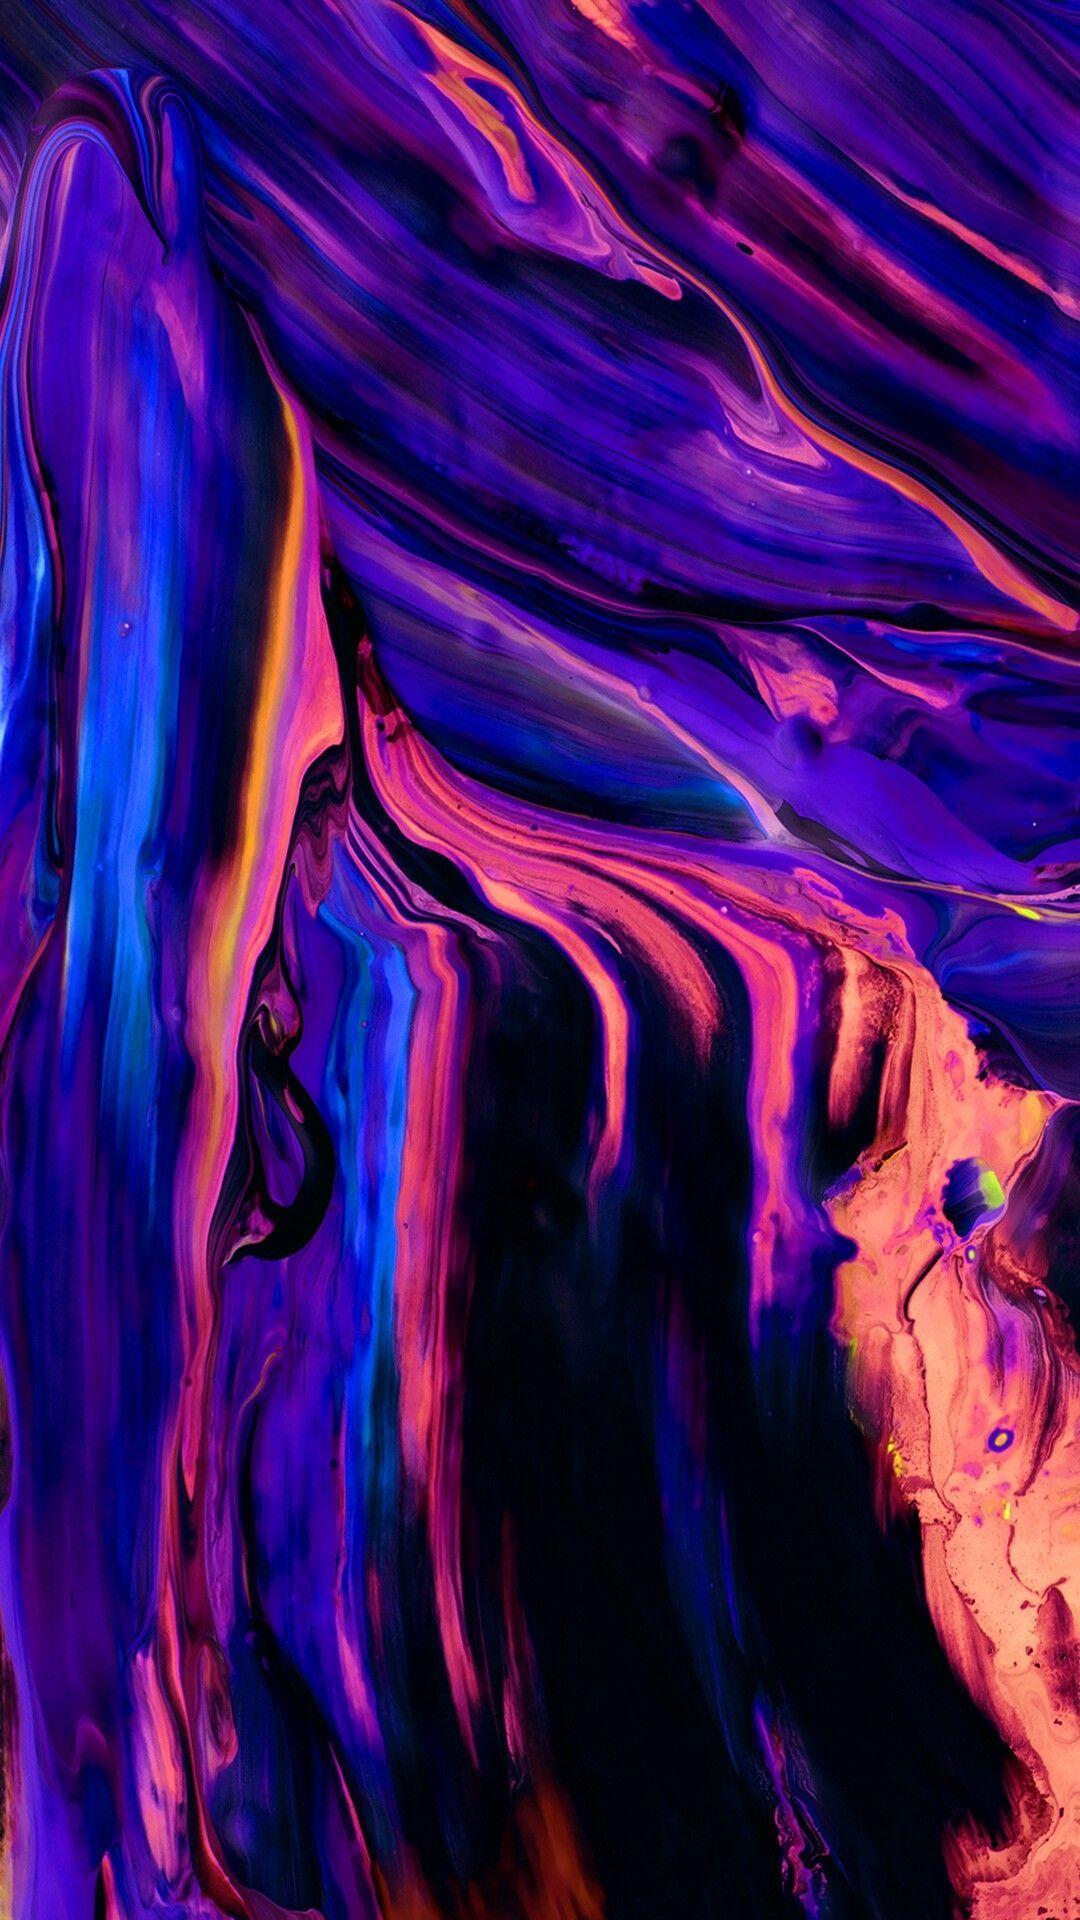 Abstract Iphone Hd Wallpapers